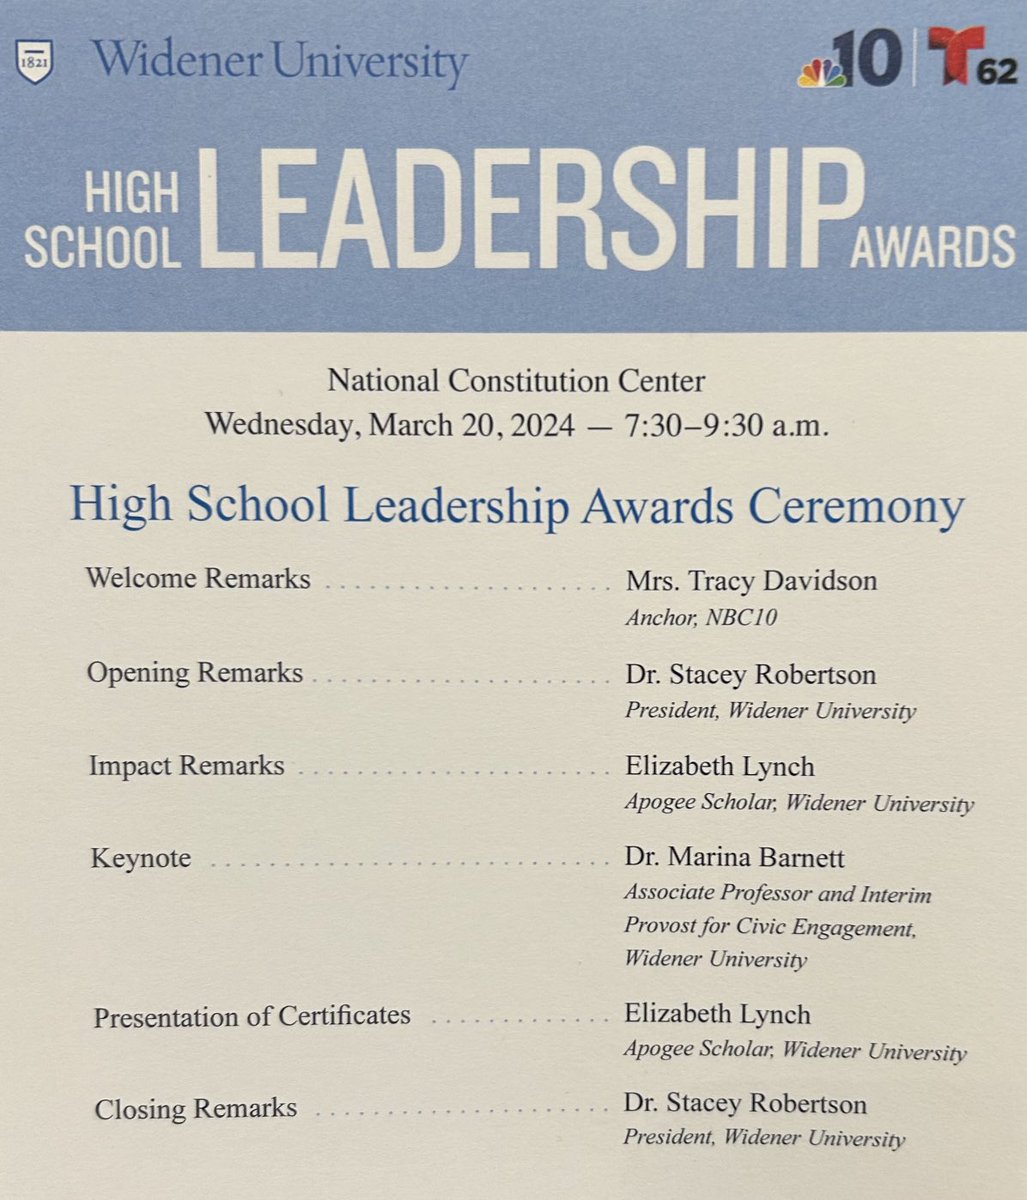 Congratulations to Mya Kleinschmidt for receiving the High School Leadership Award presented by Widener University at the National Constitution Center this morning.